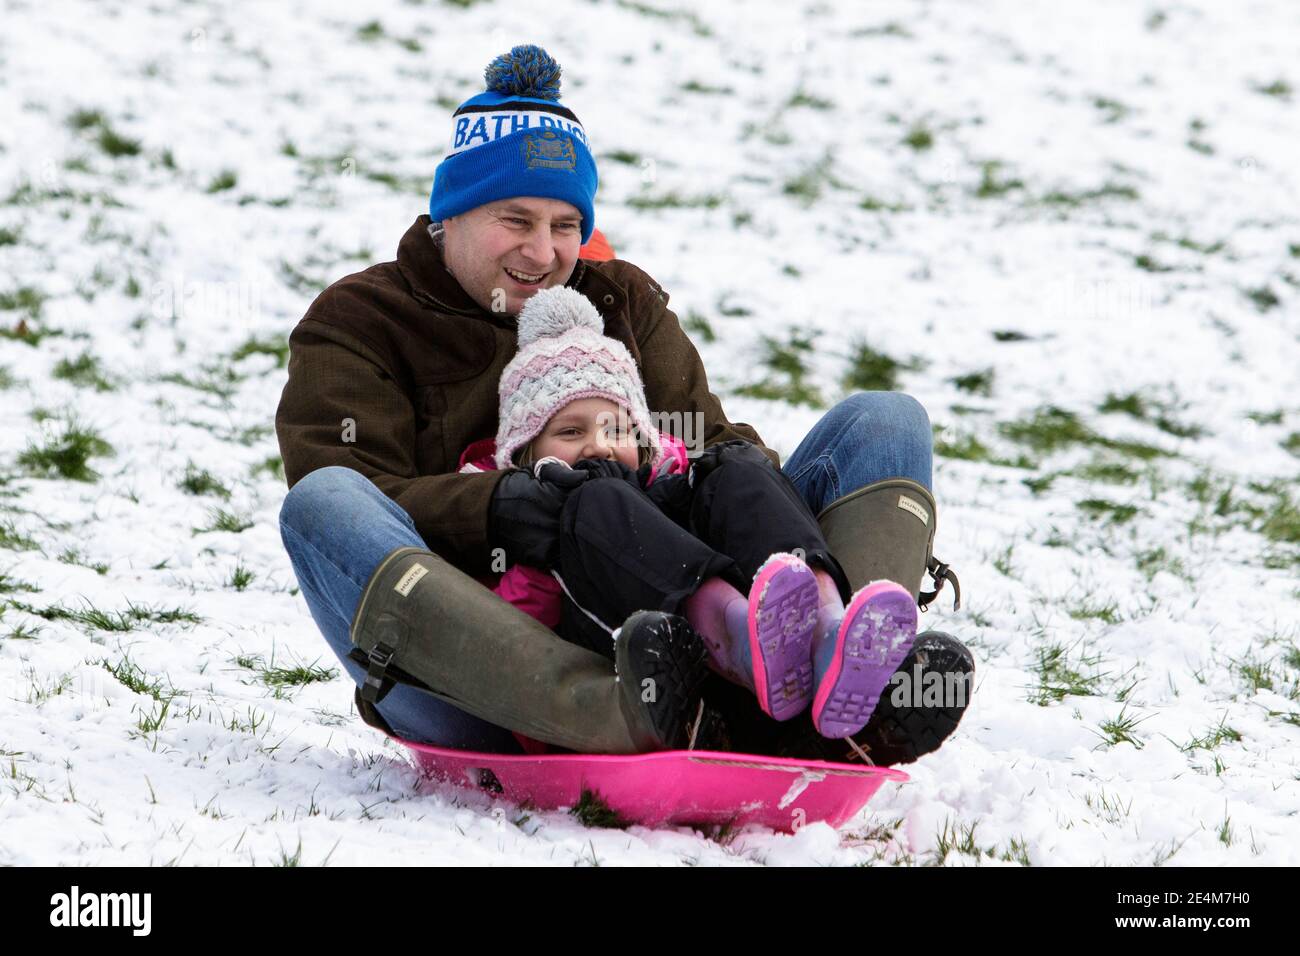 Chippenham, Wiltshire, UK. 24th January, 2021. As Chippenham residents wake up to their first snow of the year, a man and a young child are pictured in a local park in Chippenham as they slide down a hill on a sledge. Credit: Lynchpics/Alamy Live News Stock Photo